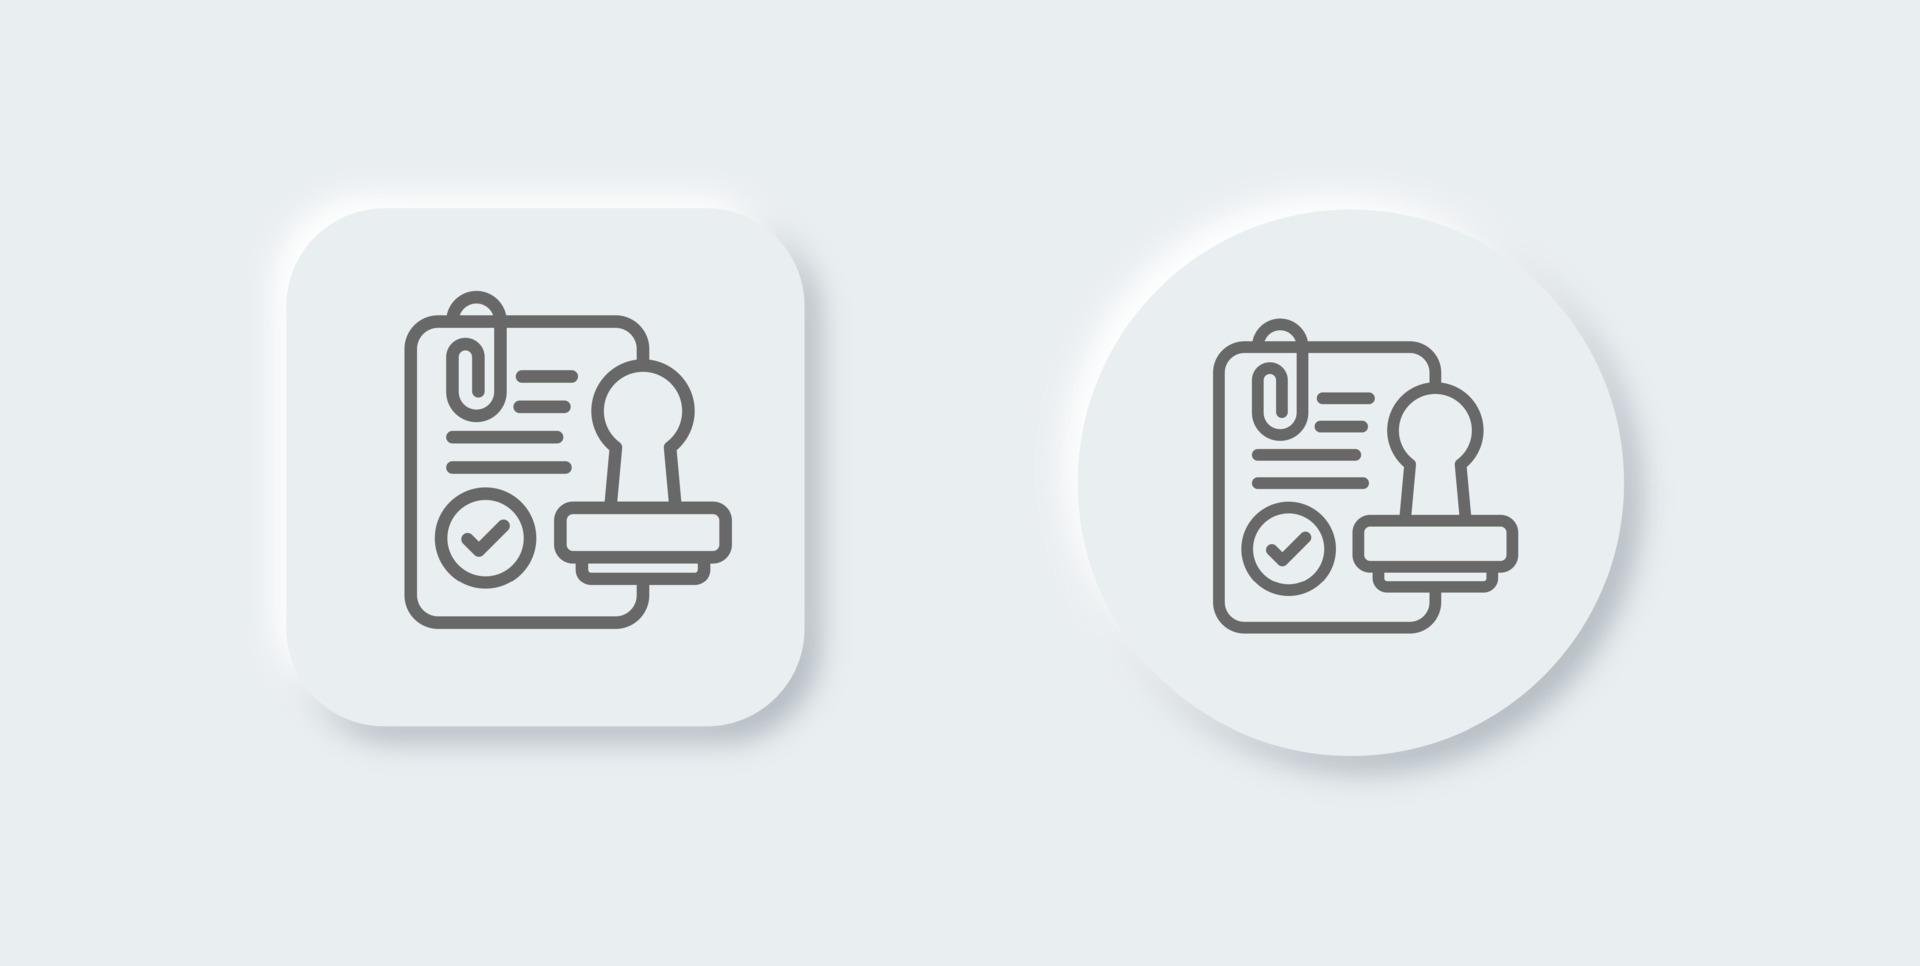 Stamp line icon in neomorphic design style. Approval signs vector illustration.